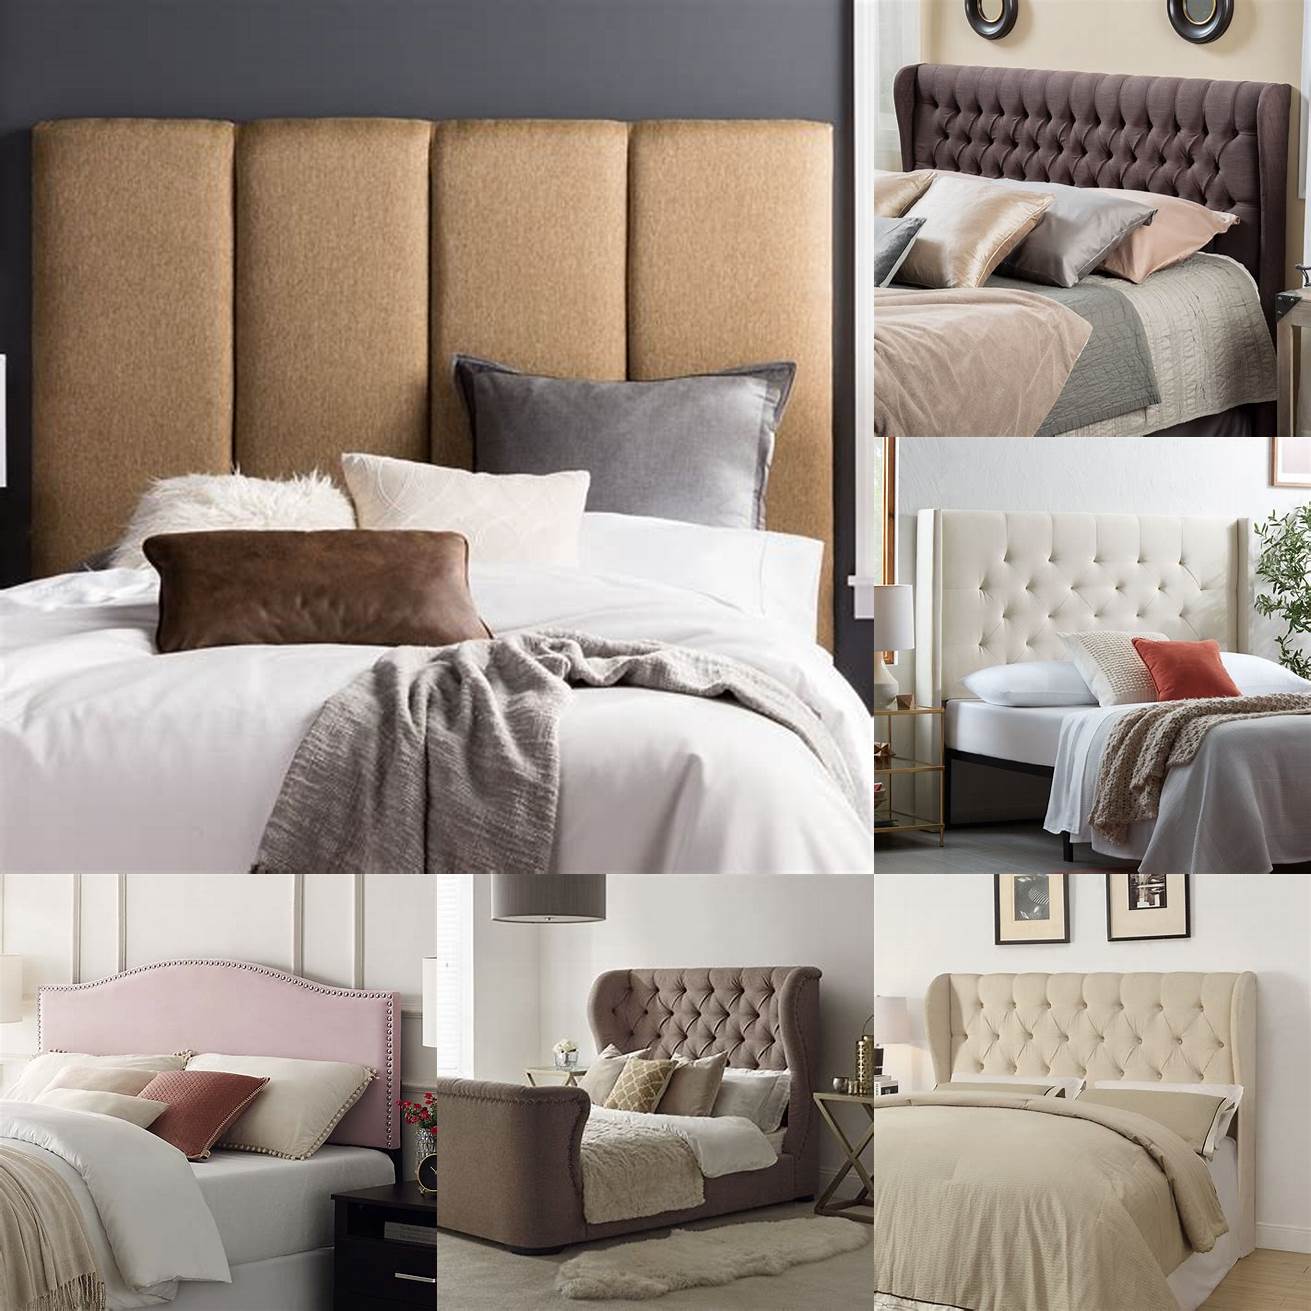 Comfort - The cushioned headboards and footboards on upholstered beds provide a comfortable place to rest your head and feet